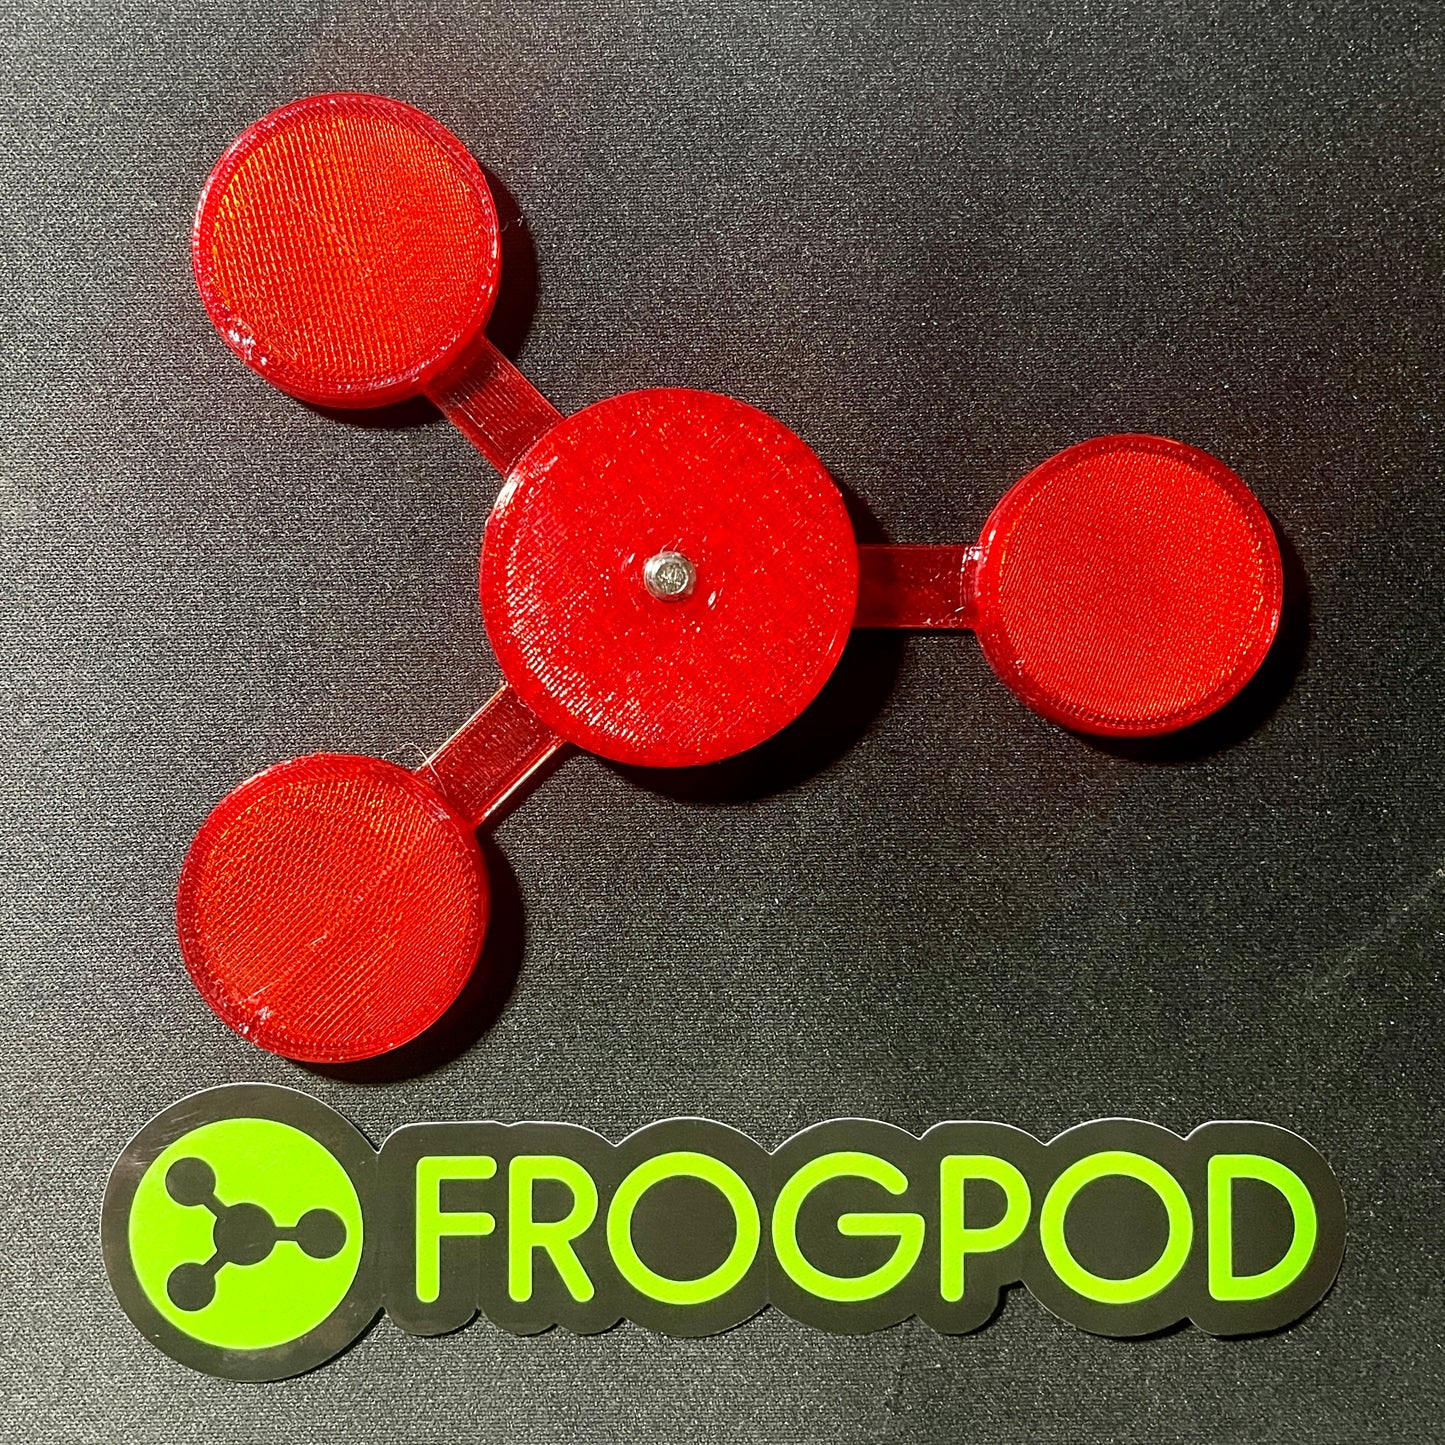 Limited RED FROGPOD!